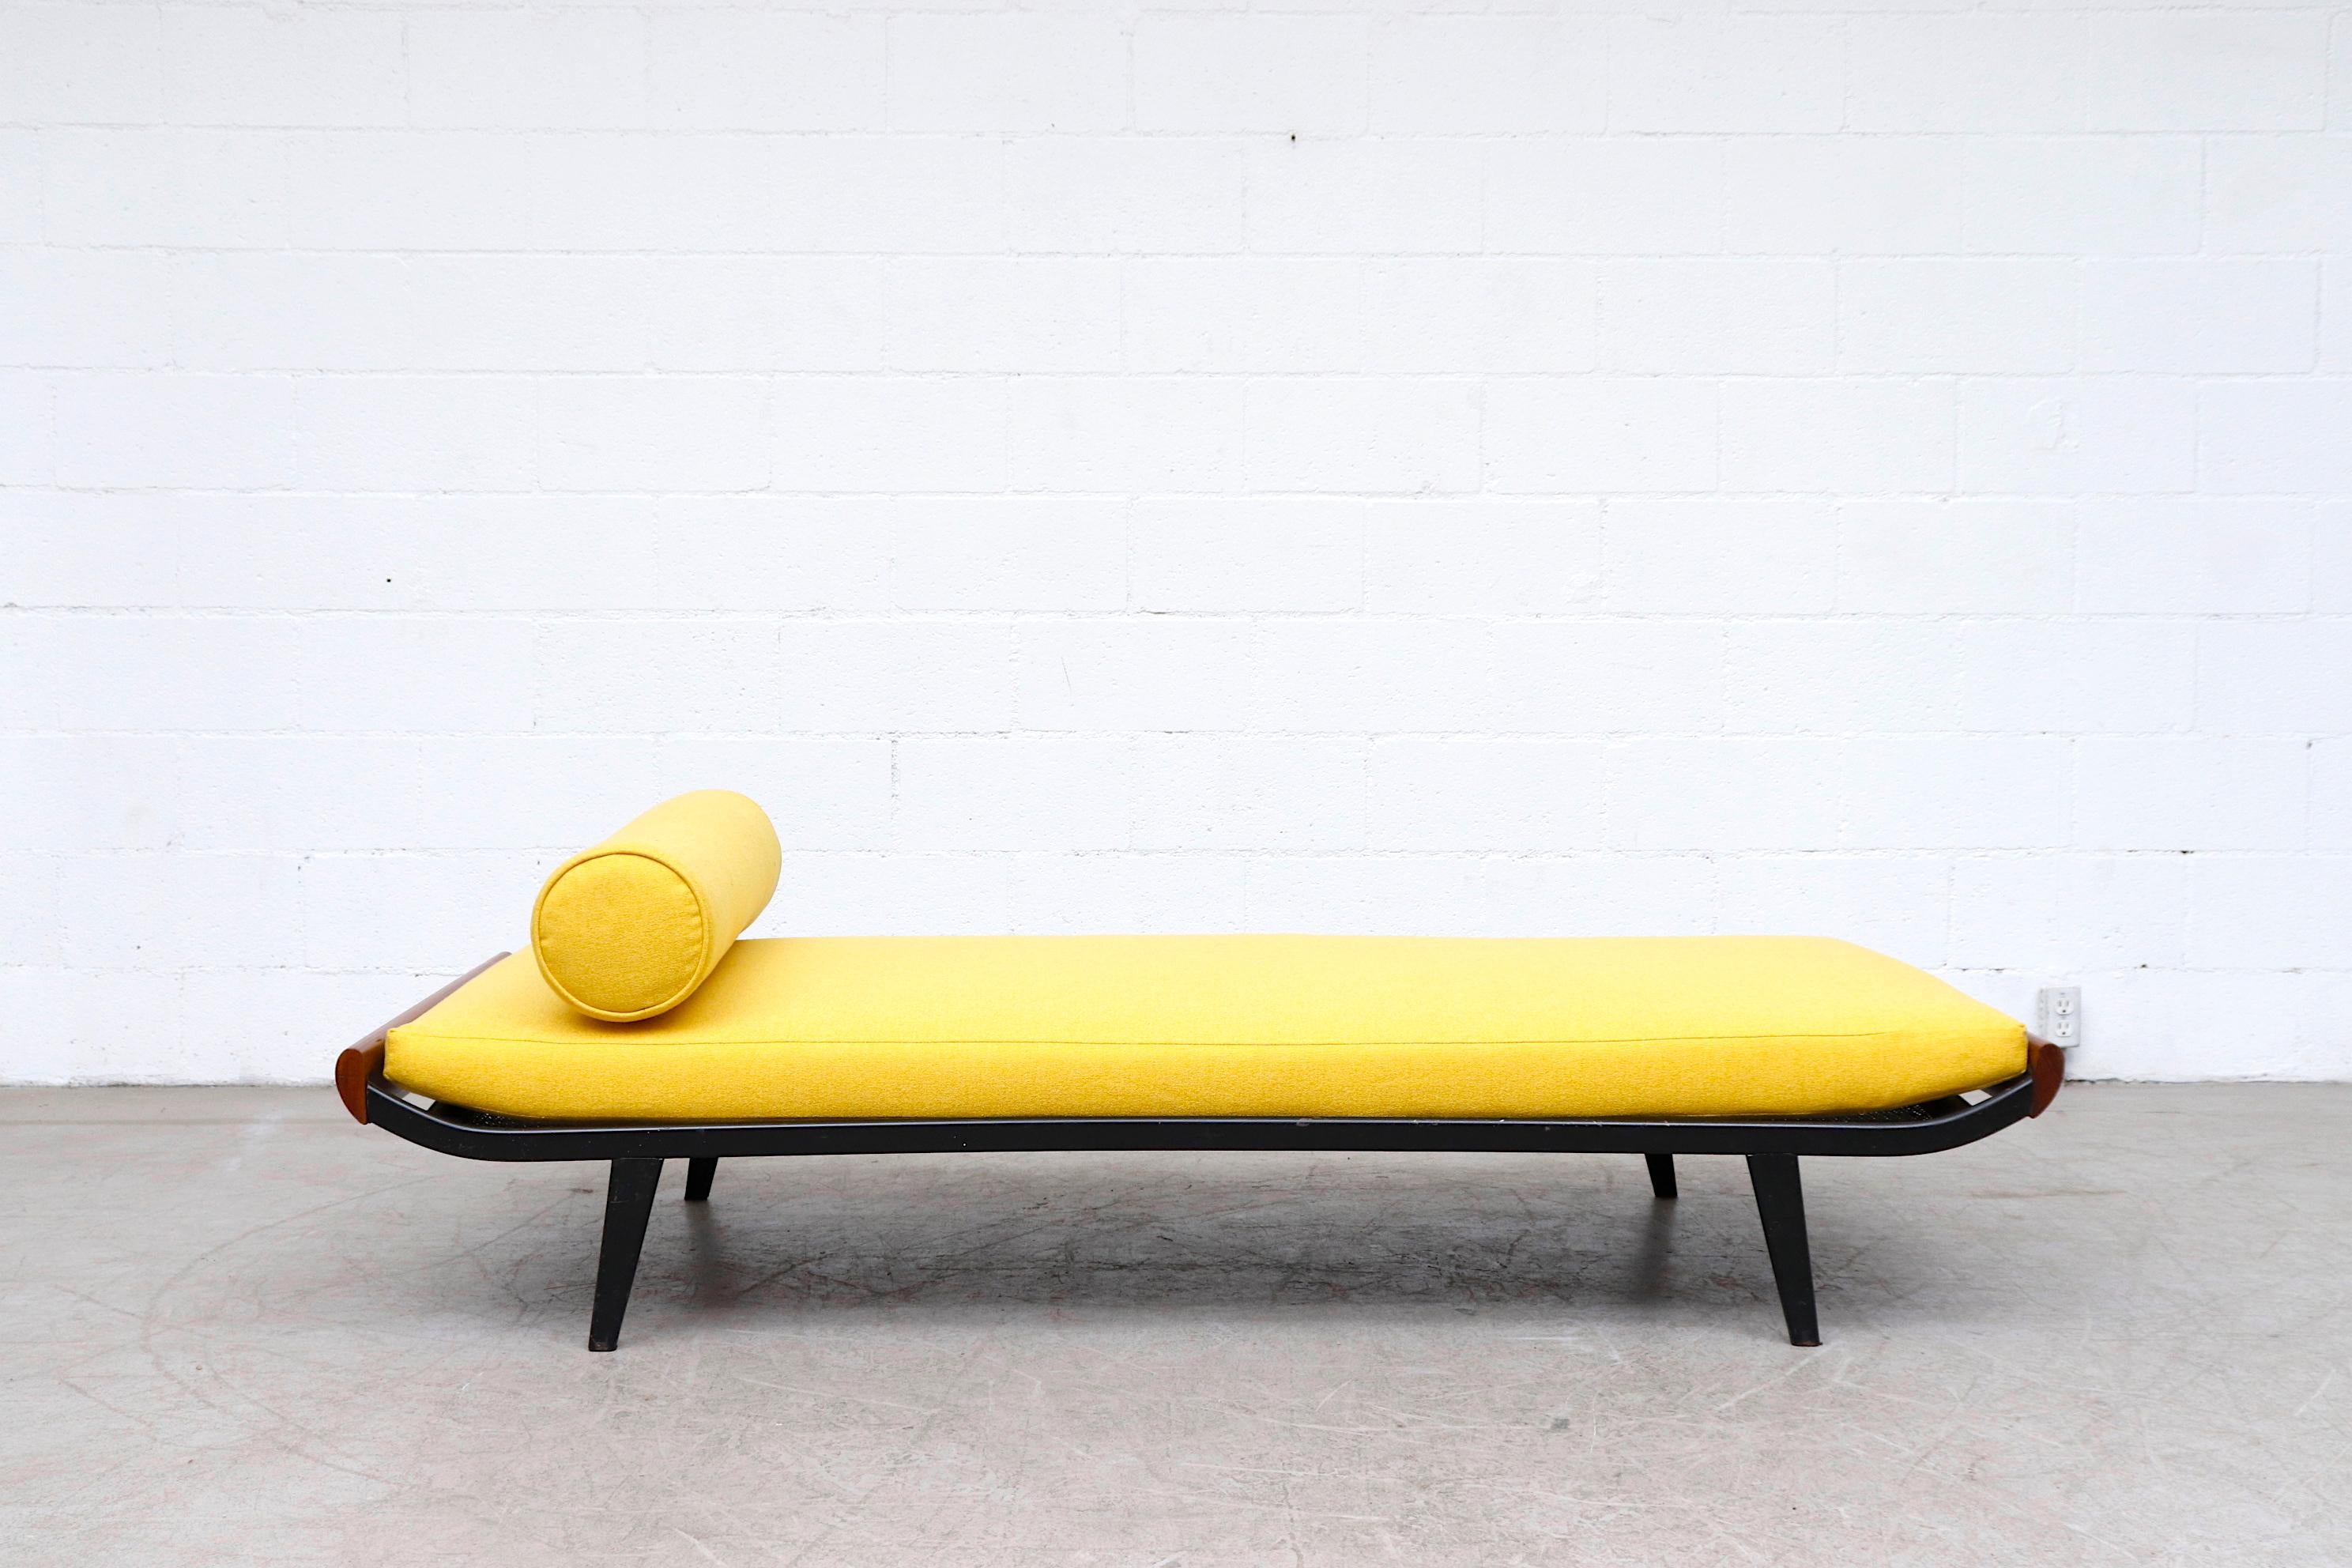 Beautiful 1960's Cleopatra style day bed by A.R. Cordemeyer. Lightly refinished teak wood ends with dark grey metal enameled frame and 'Auping' tag on mesh springs with new bright sunshine yellow mattress and matching bolster. Frame in original